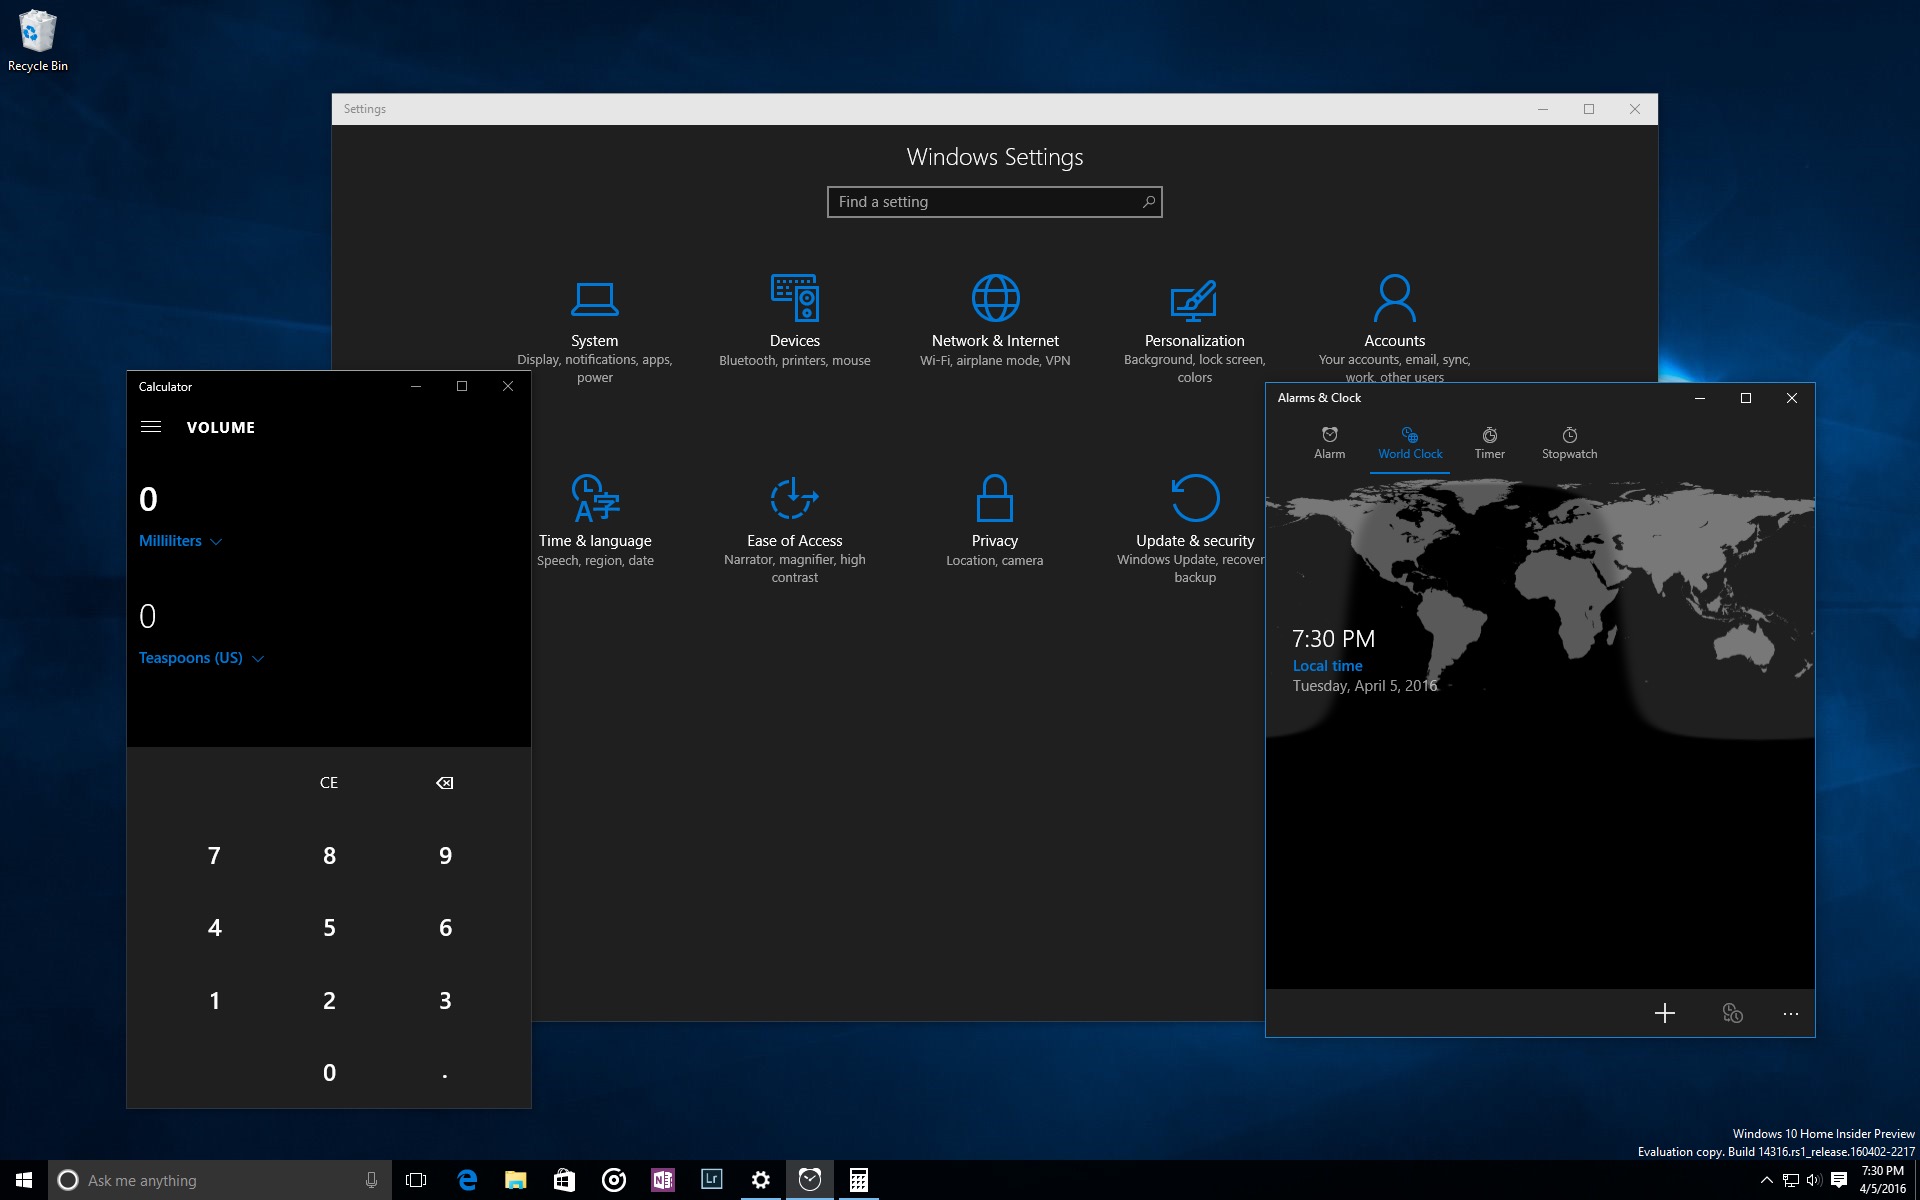 Windows 10 Insider Preview Build 14316-02